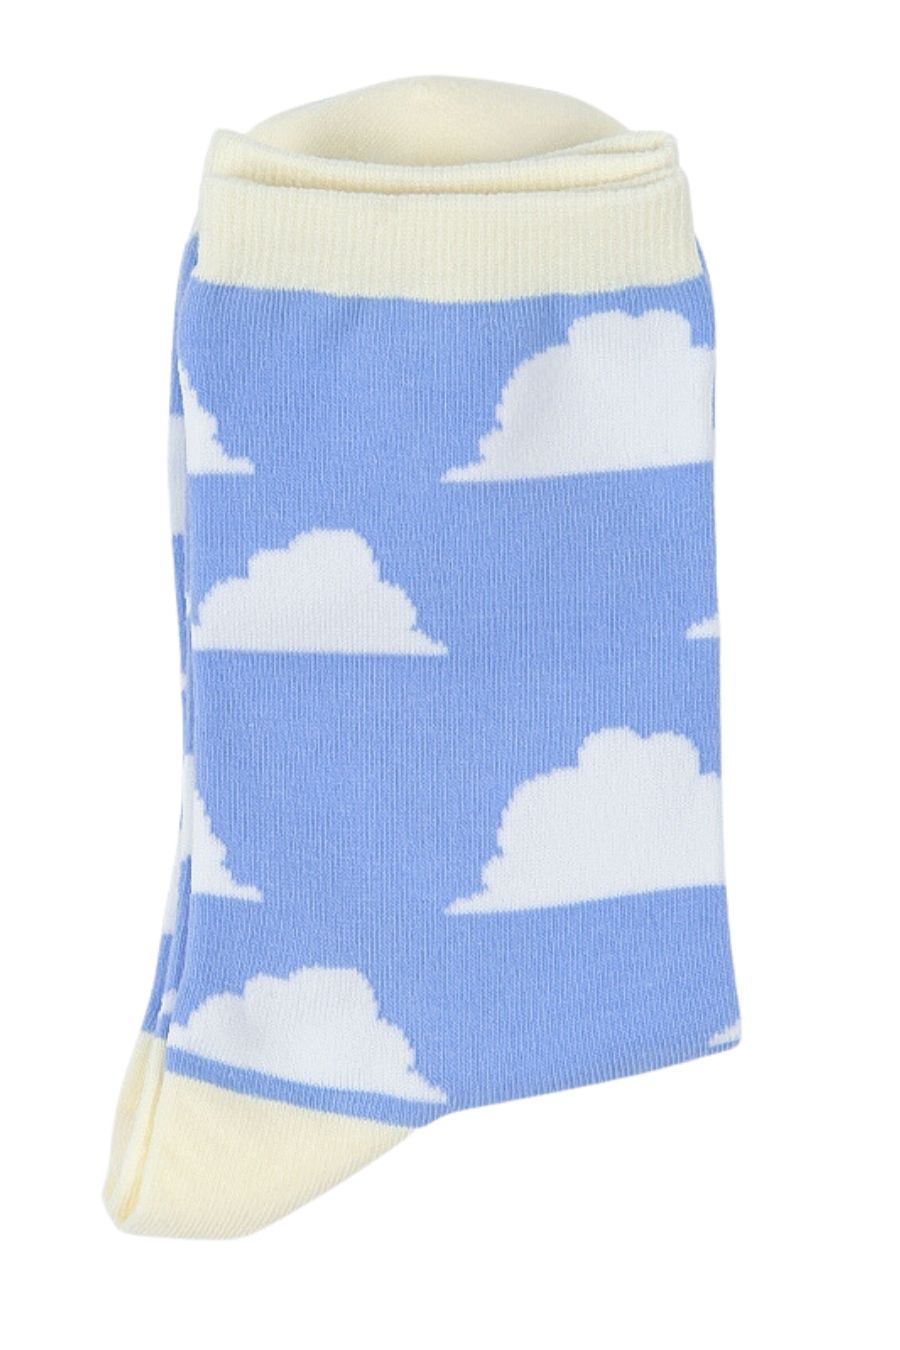 folded socks, a close up of the white cloud pattern